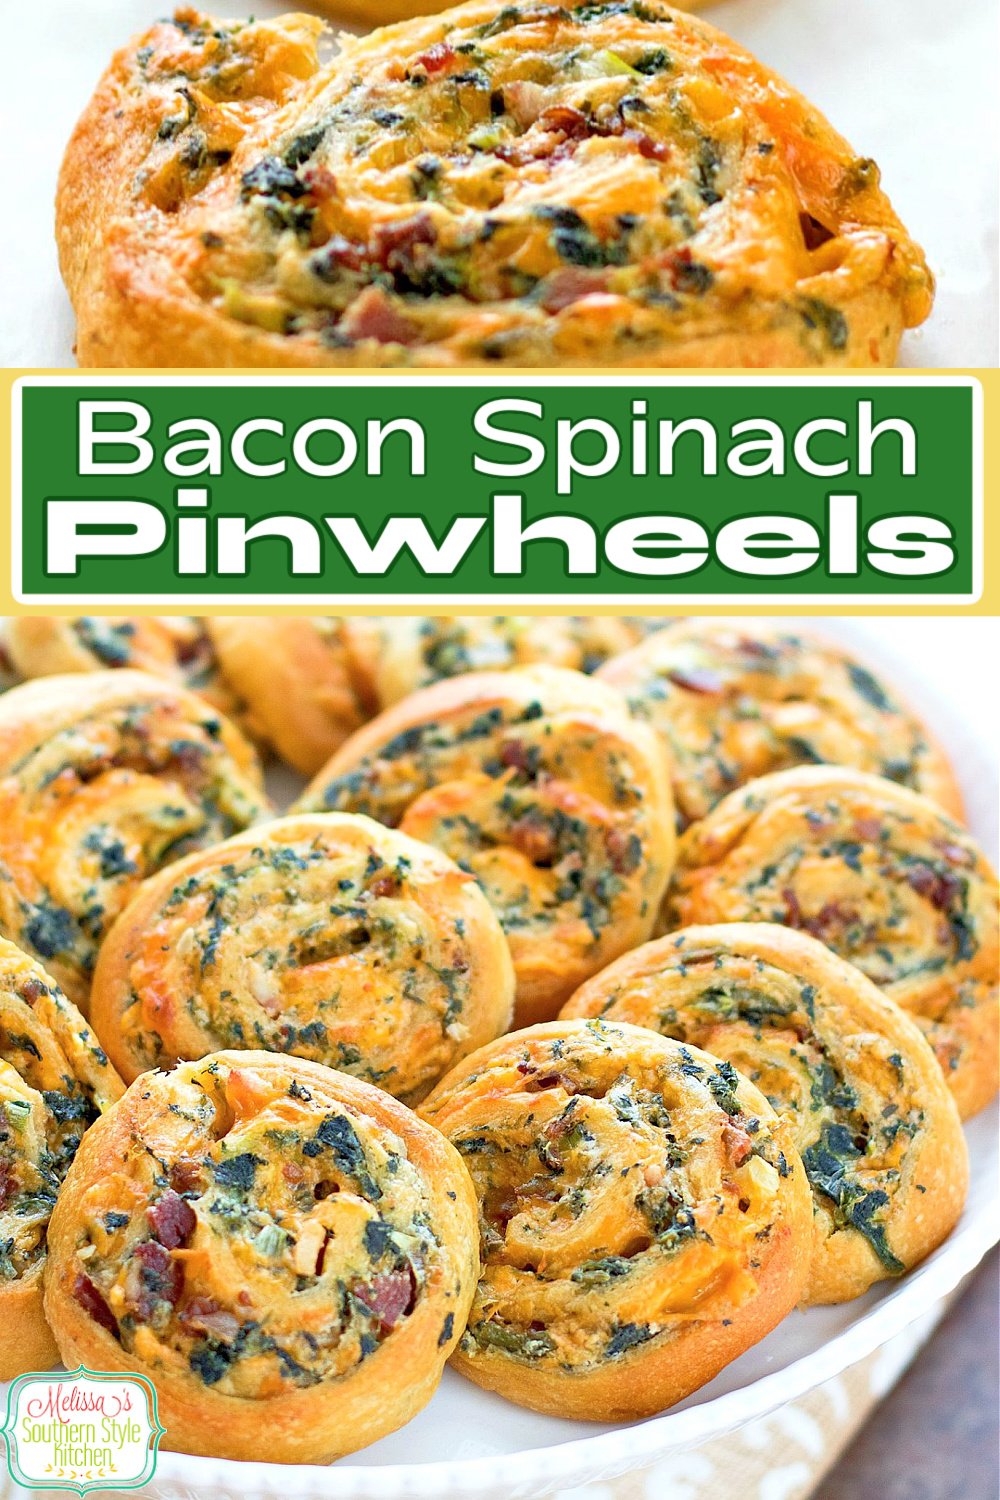 These easy Bacon Spinach Crescent Pinwheels come together in a snap #crescentrolls #easycrescentrollpinwheels #baconspinachpinwheels #crescentrollrecipes #easyappetizers #easyappetizerrecipes #holidaybrunch #southernfood #christmasrecipes #newyearseve #spinach #baconrecipes #pinwheels #southernrecipes via @melissasssk